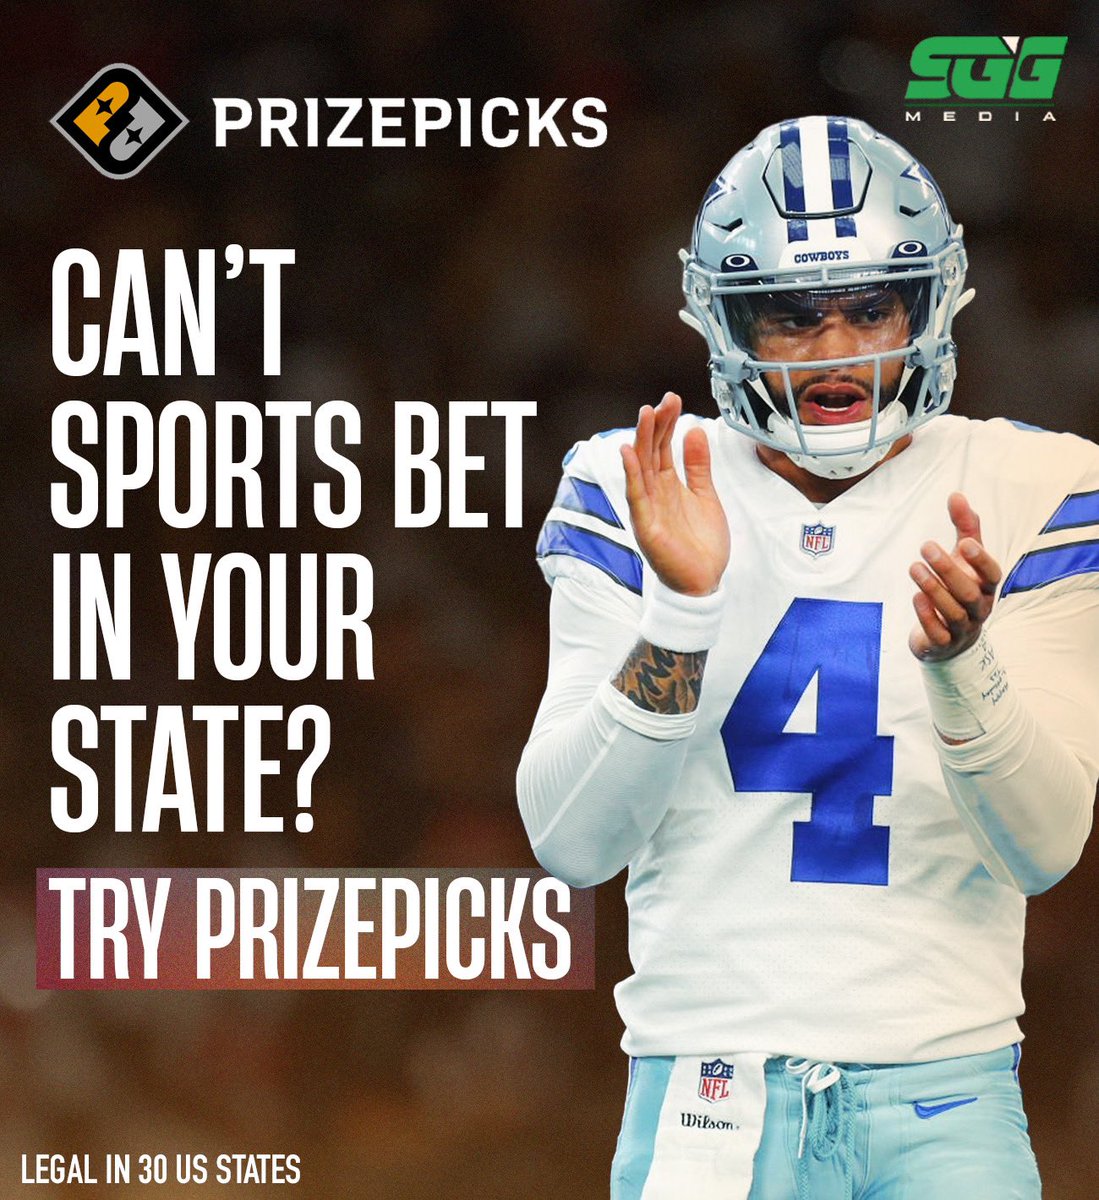 Can’t sports bet in your state? Try the BEST DFS app out there, @PrizePicks ✅ 🏈Take advantage of PrizePick’s LIMITED TIME OFFER and get 100% DEPOSIT MATCH up to $100 using THIS PROMO LINK: bit.ly/SGG_PrizePicks 📈 Win up to 10x your Money!🏆 Legal in 30 US States👀